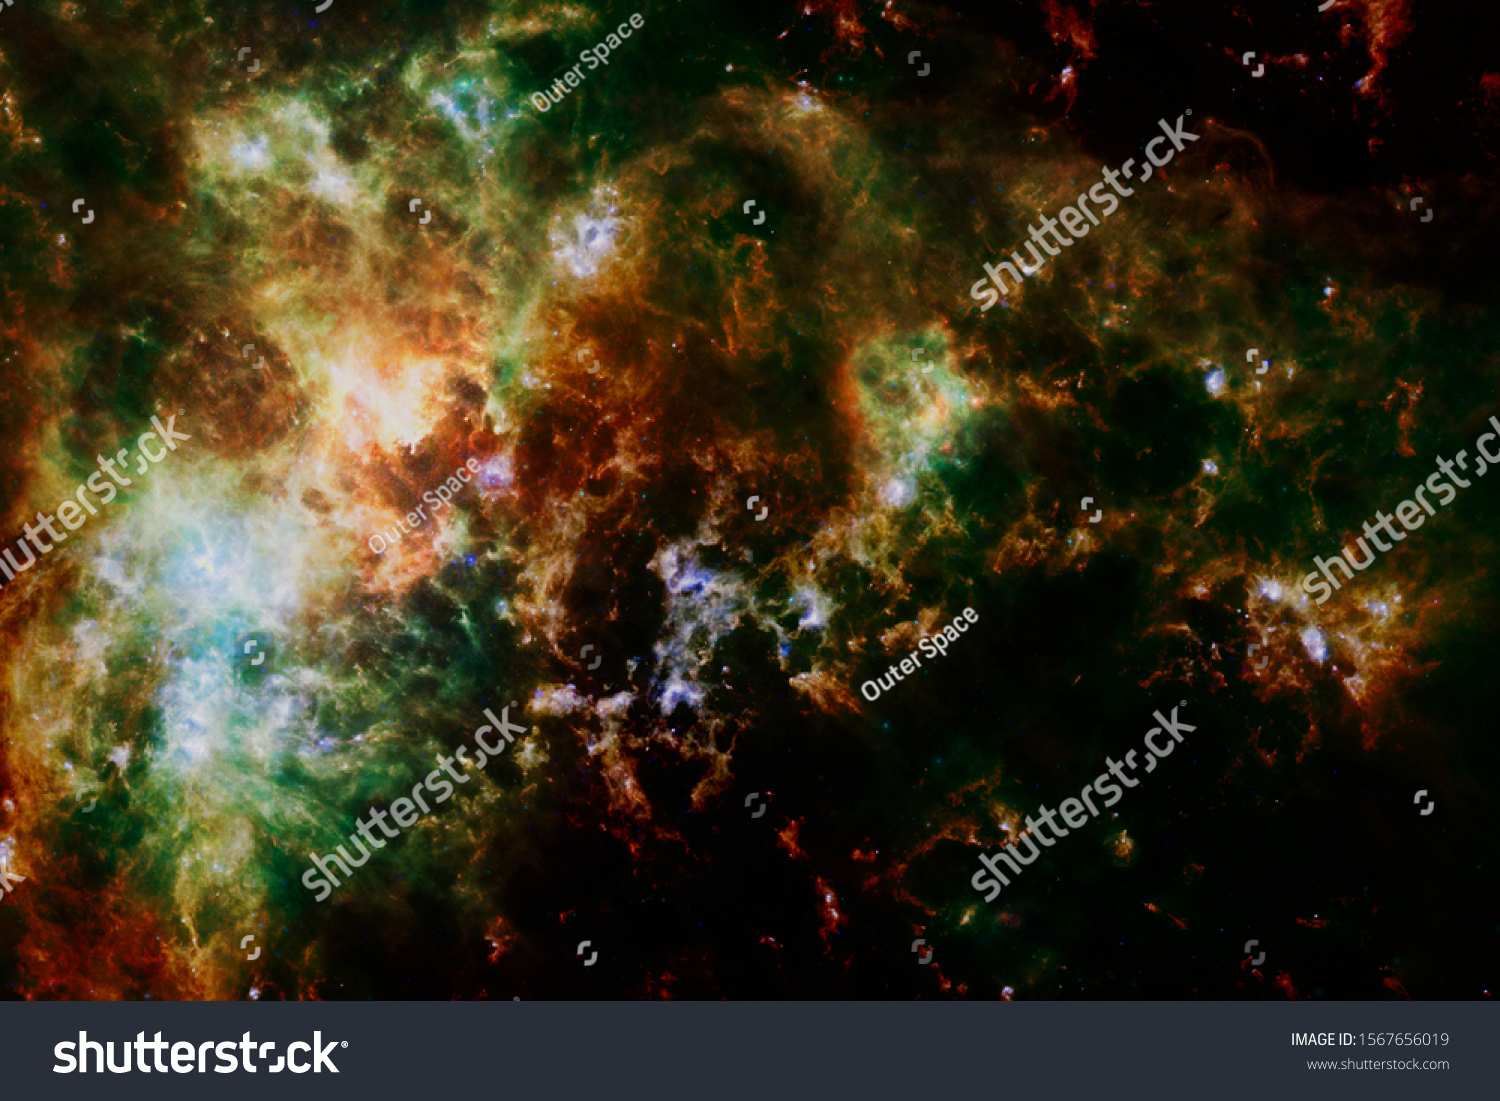 Nebula and galaxies in space. Elements of this image furnished by NASA. #1567656019